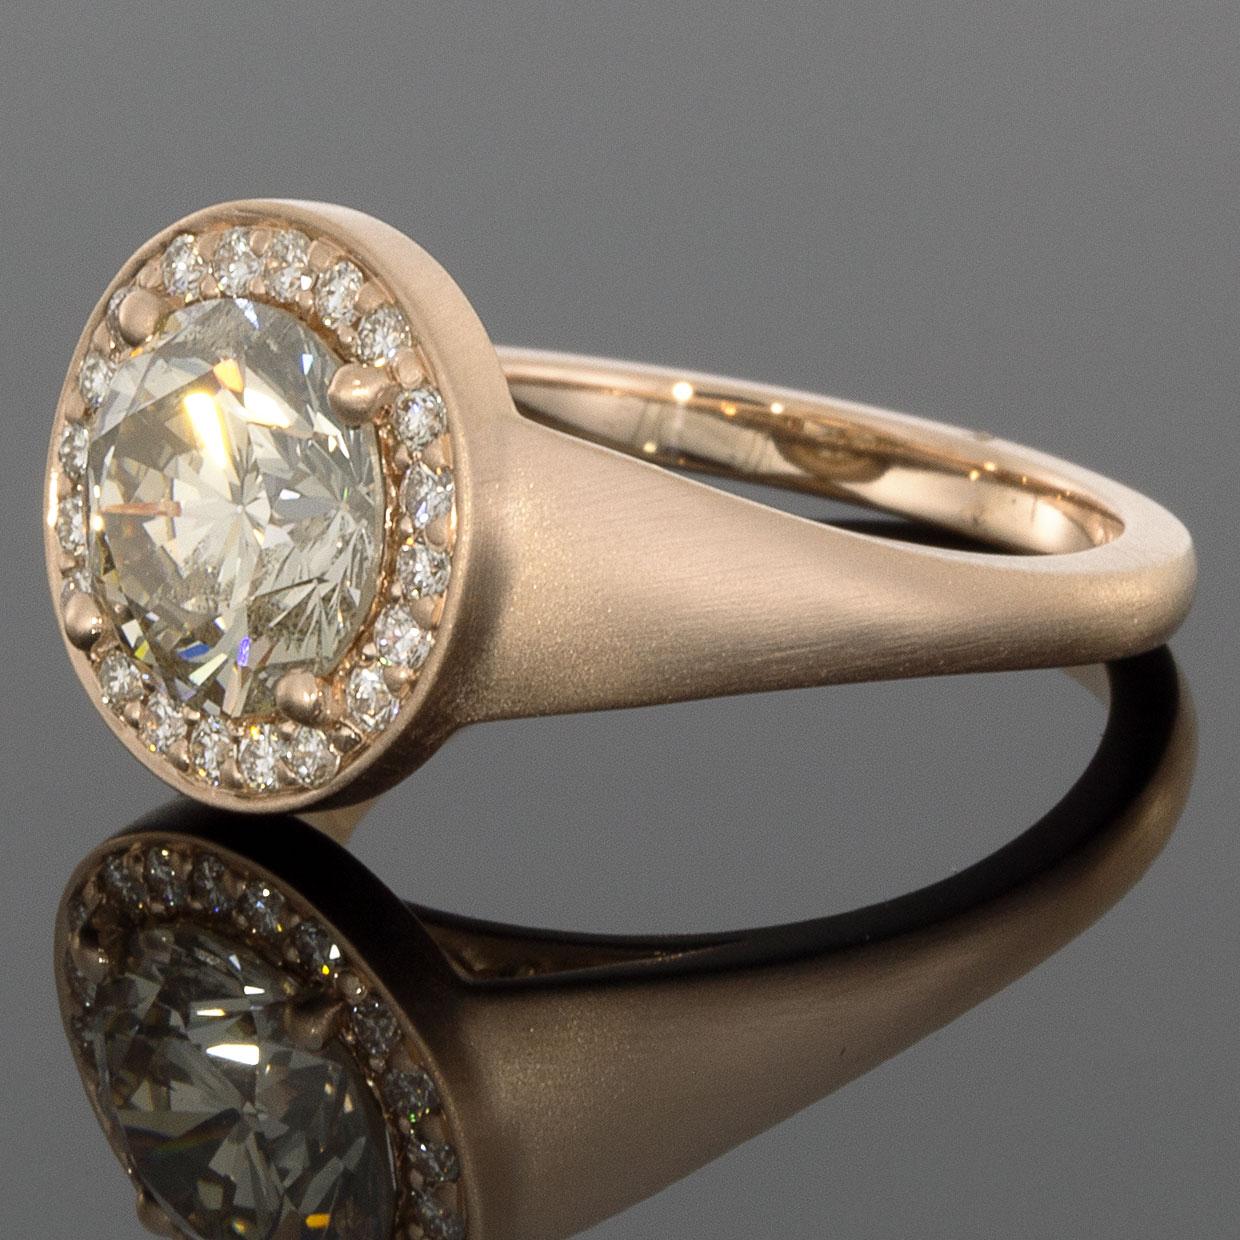 A one-of-a-kind design by our experts, this stunning ring is radiant wrapped in the warmth of luscious rose gold. The GIA certified center diamond is showcased by a halo of brilliant white diamonds, & the tapered shank flows gracefully down the